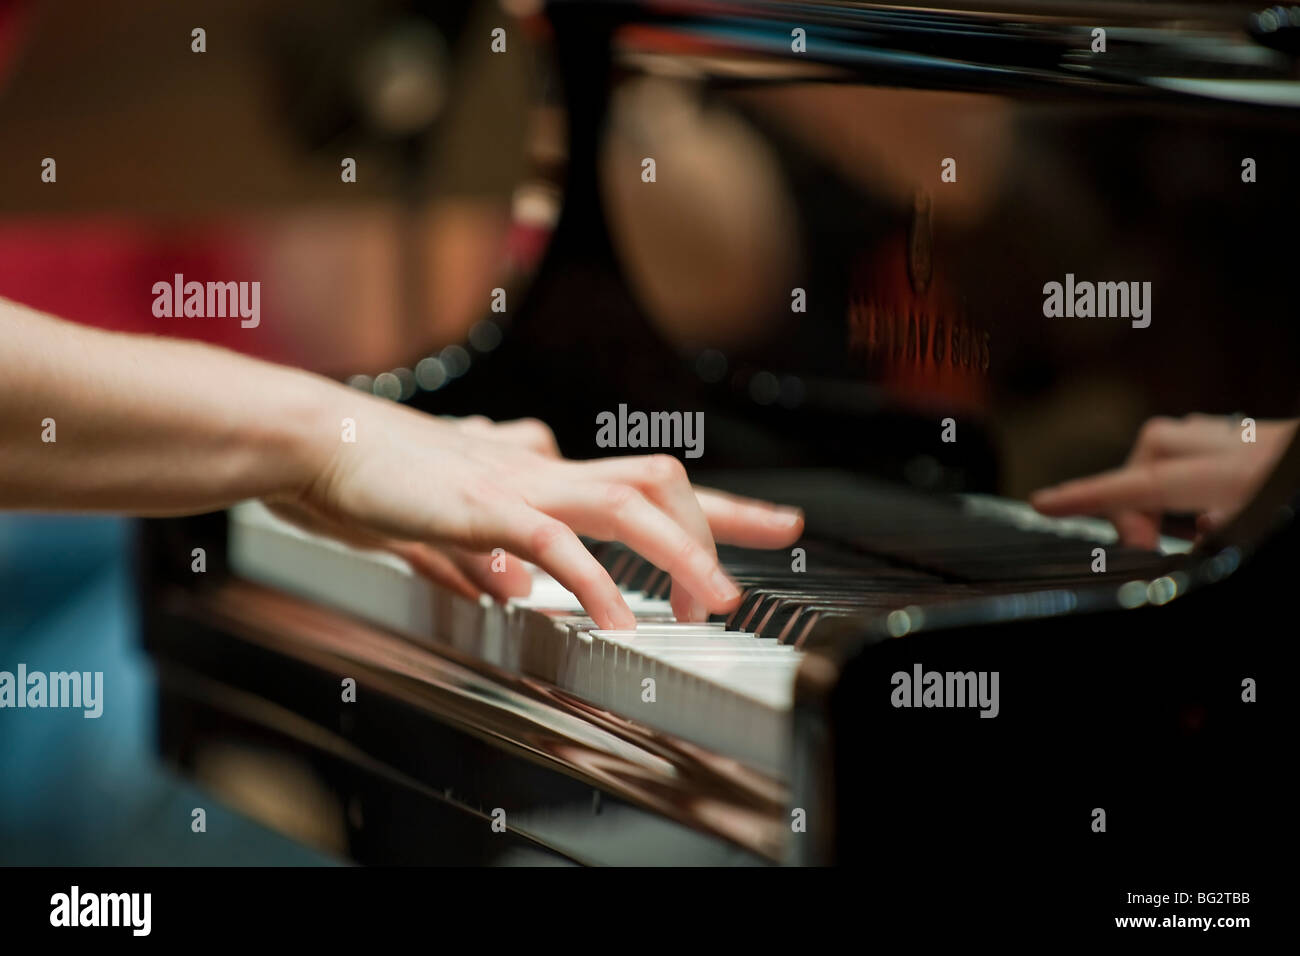 Hands on the keyboard, pianist playing grand piano Stock Photo